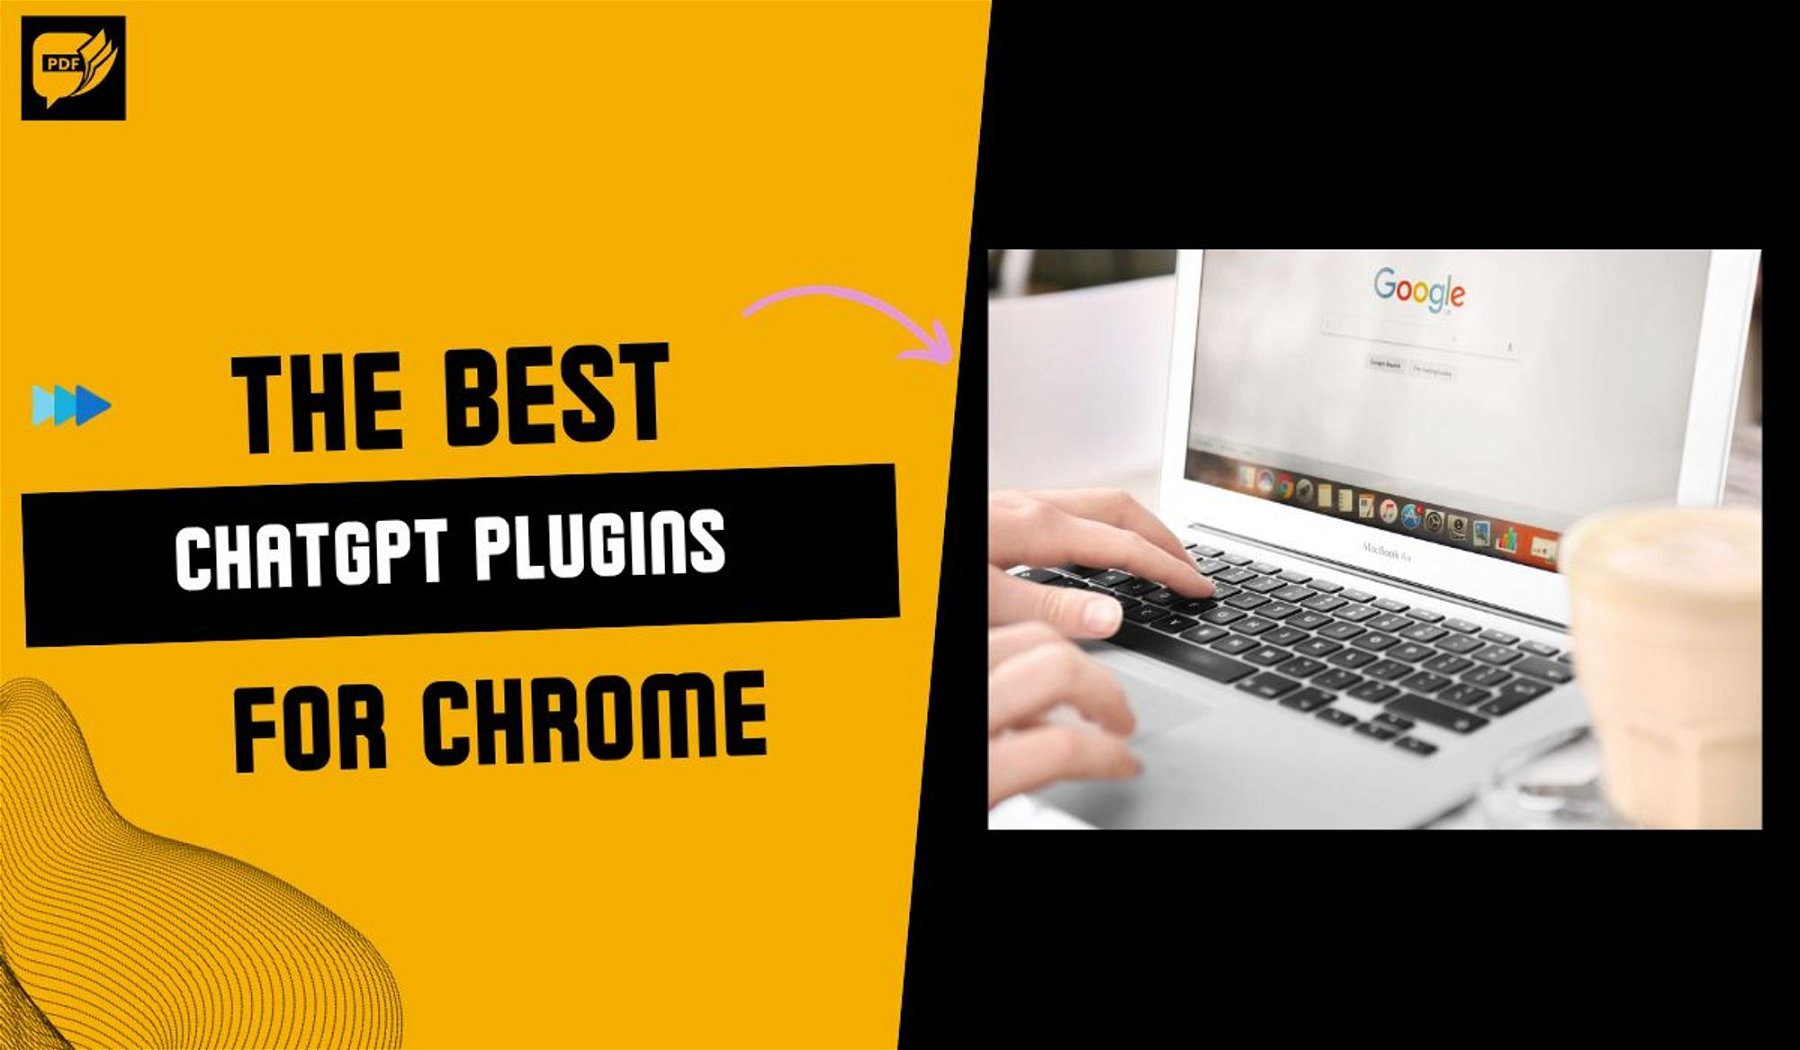 The 5 Best ChatGPT Plugins for Chrome